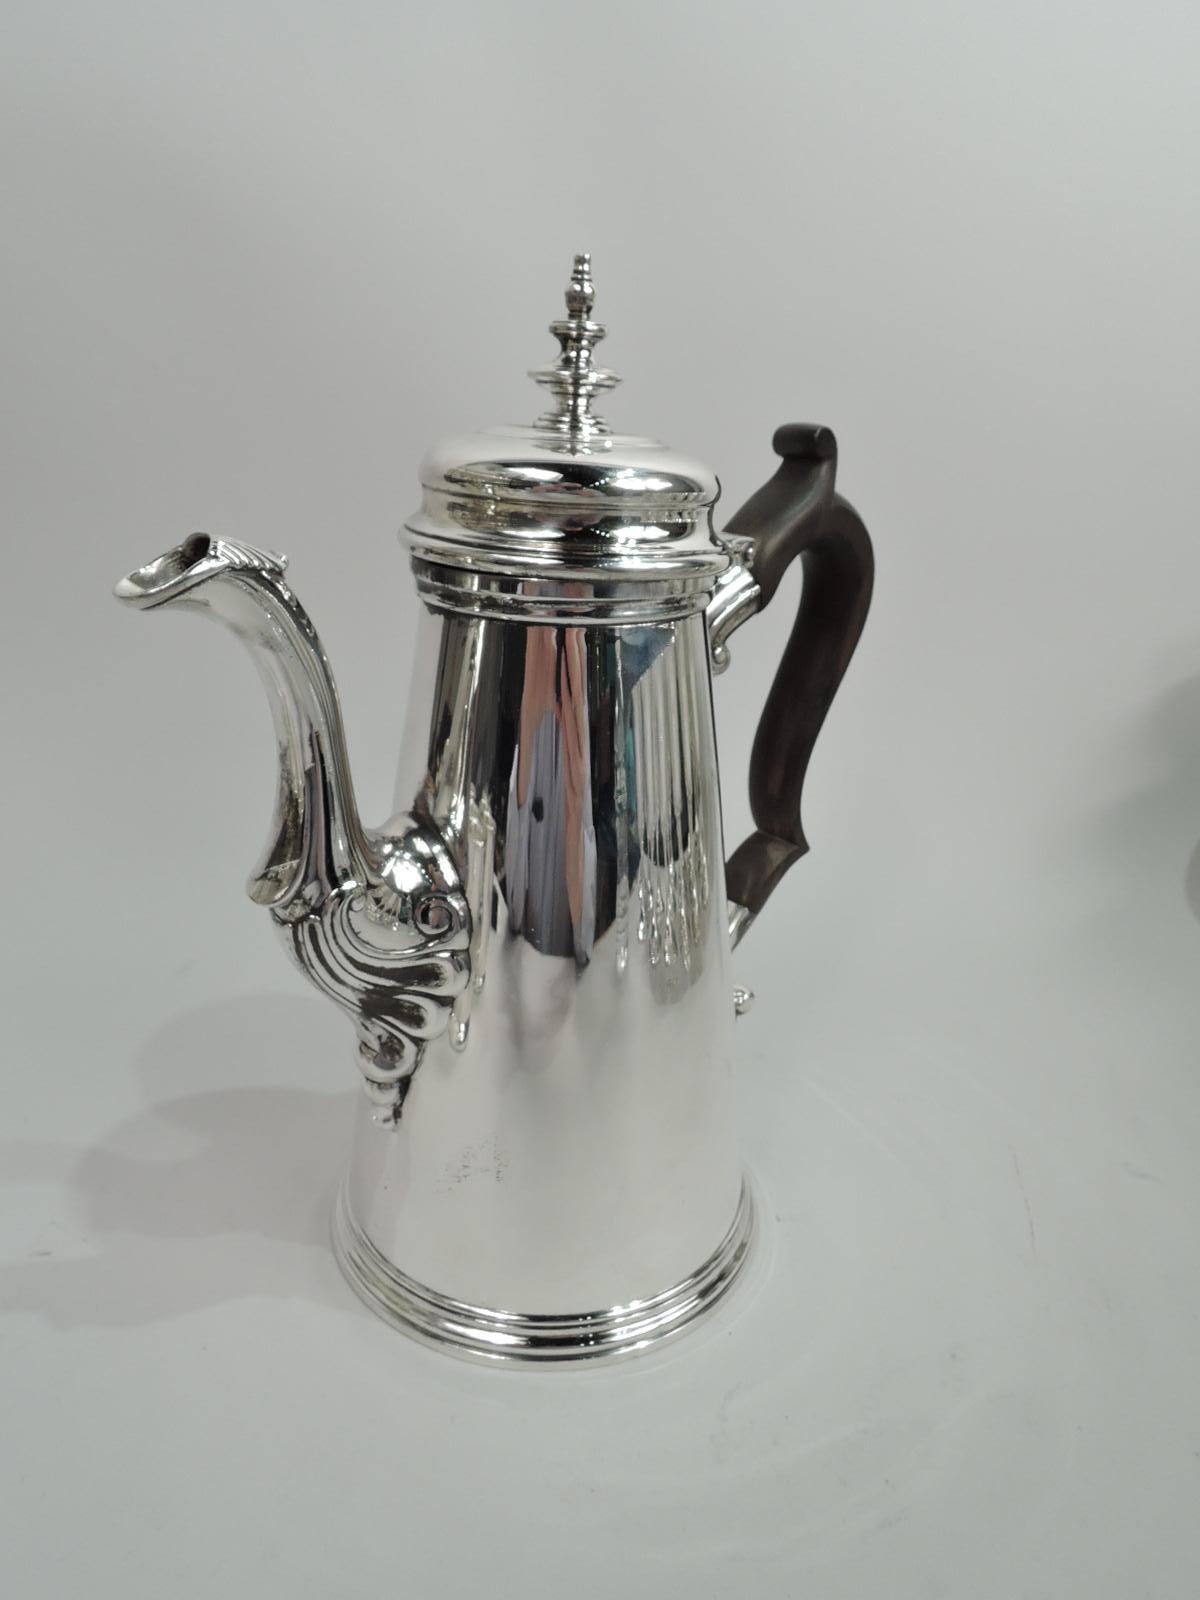 American Colonial sterling silver coffeepot. Made by Tiffany & Co. in New York, ca 1916. Conical with capped and scroll-mounted s-scroll spout. Capped double-scroll handle in stained wood. Cover hinged and domed with finial. Holds 2 1/4 pints. Fully